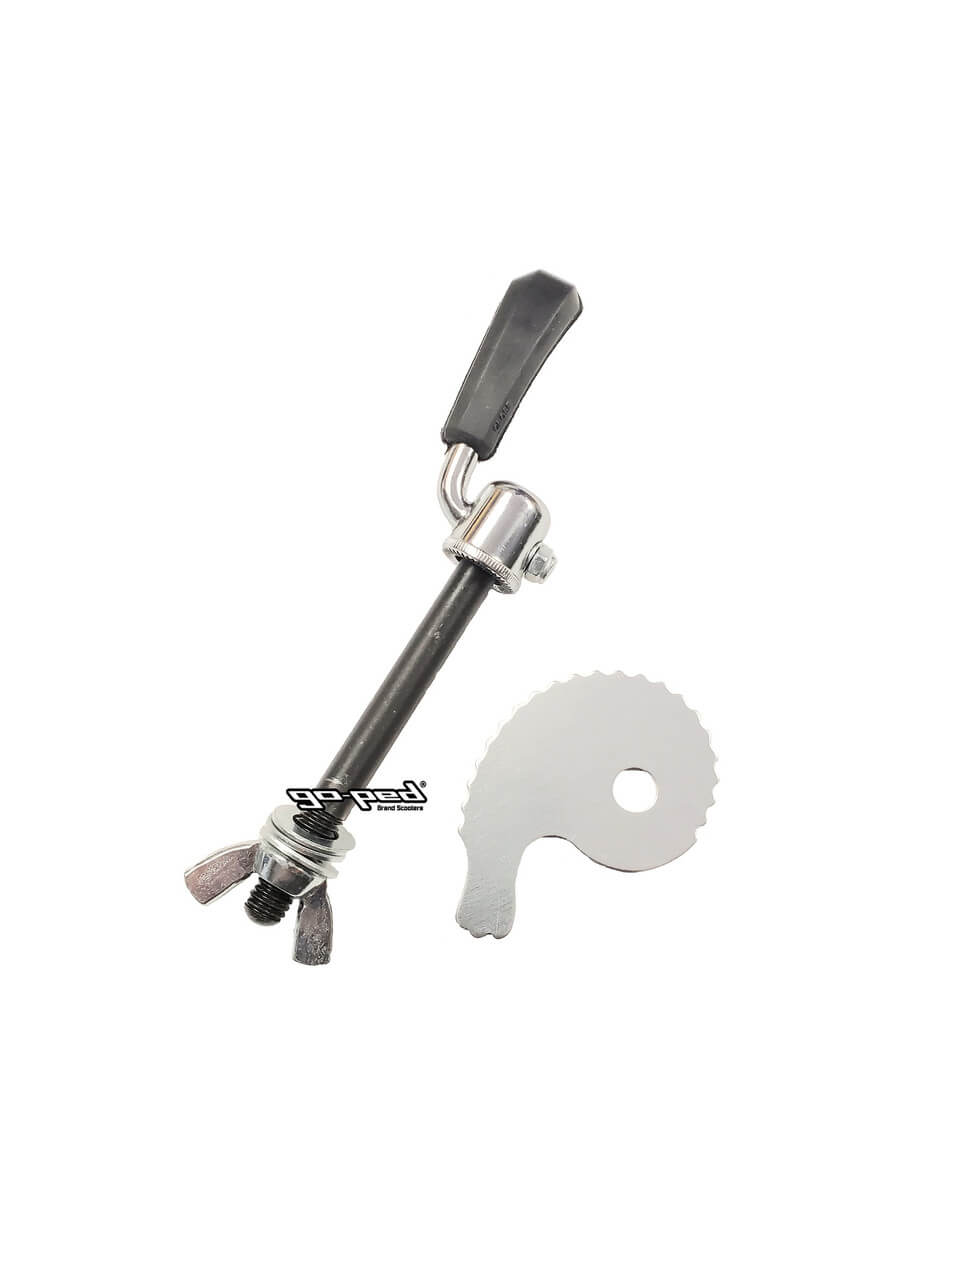 Go-Ped Aftermarket Quick Release Axle Assembly (1032X) for Scooters